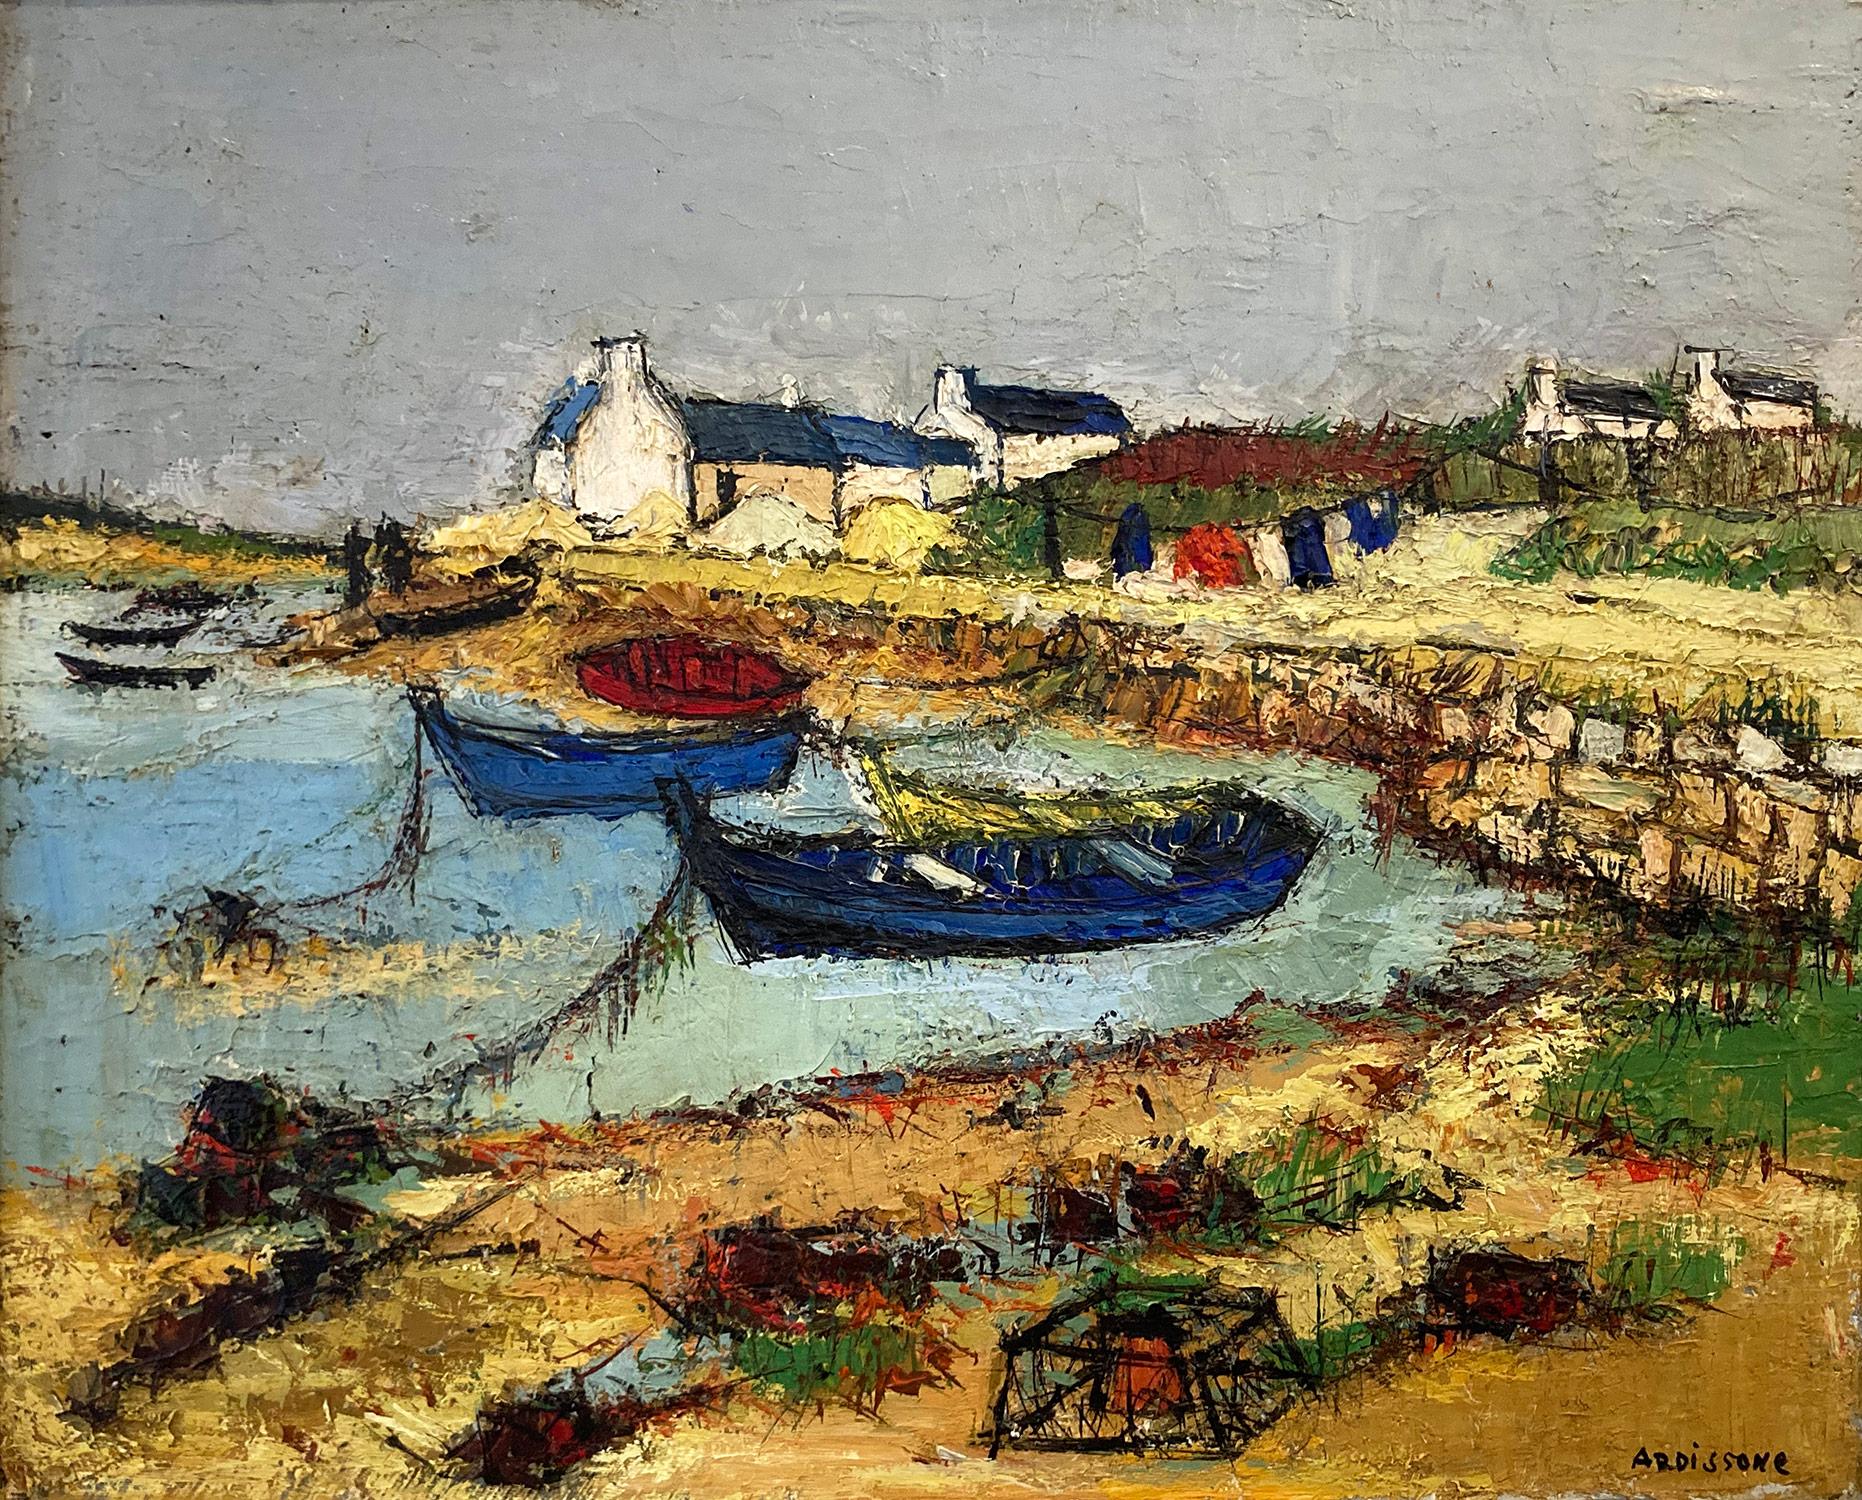 This stunning piece of art titled “Bateaux a Carnac